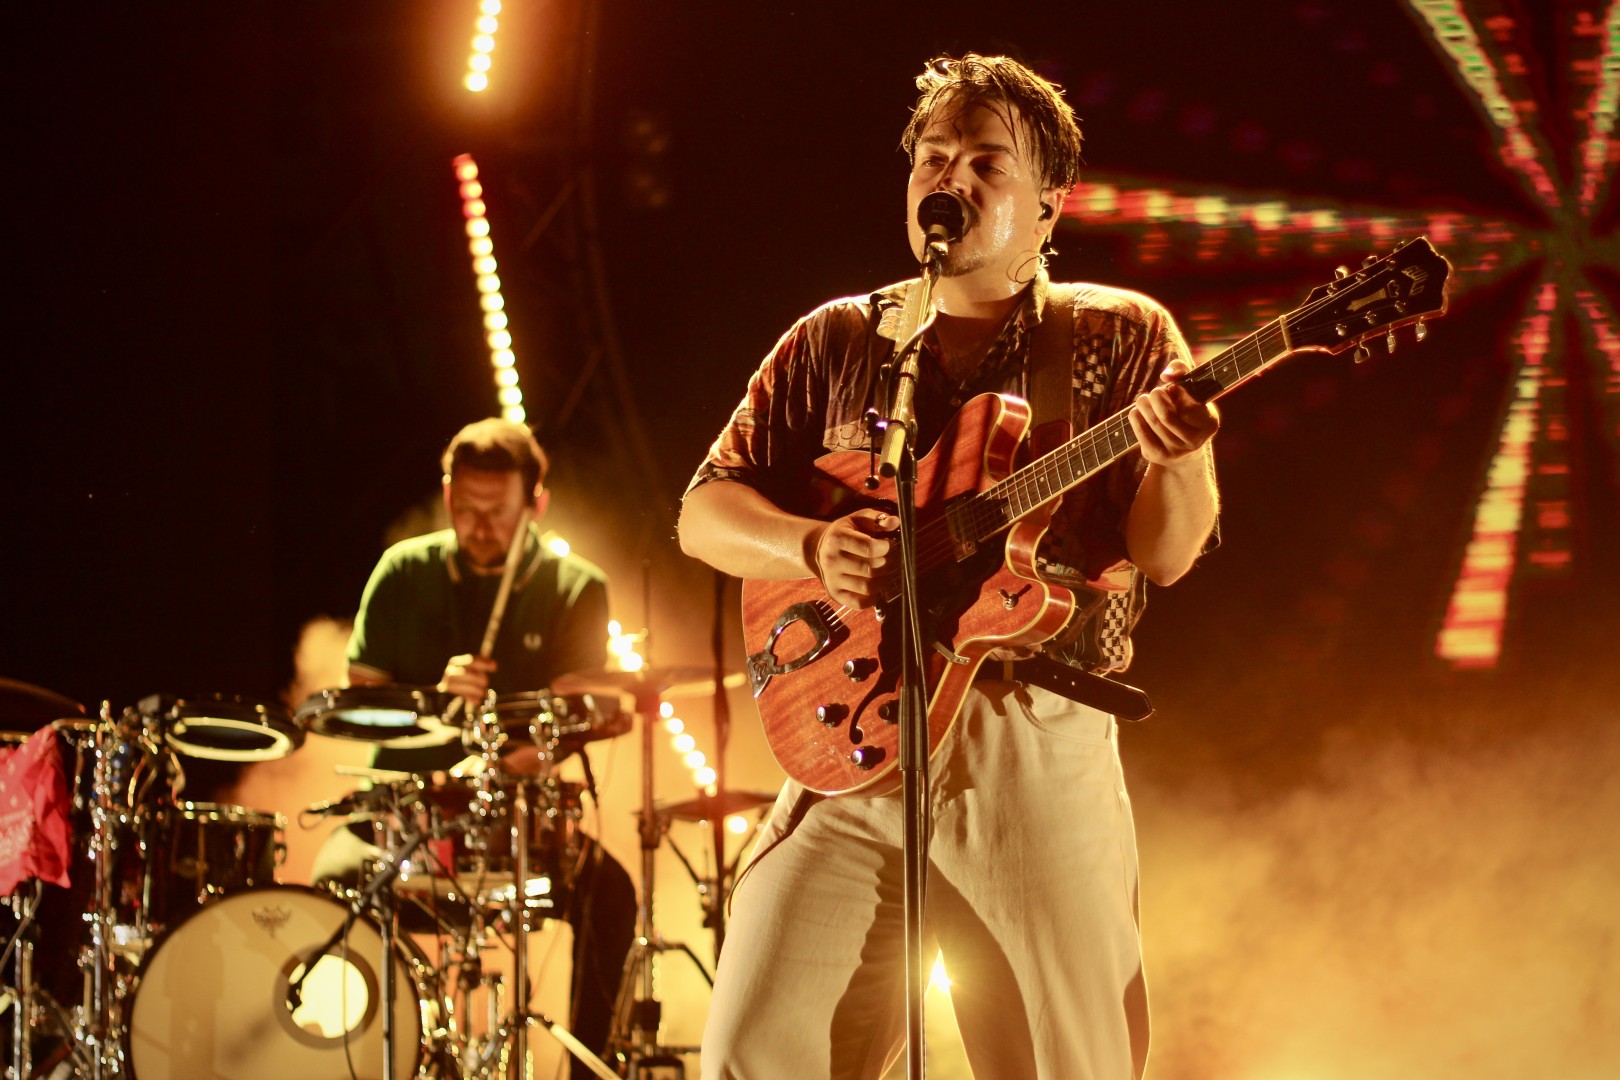 Milky Chance at Palas Gardens in Iasi on May 21, 2022 (02494066f0)